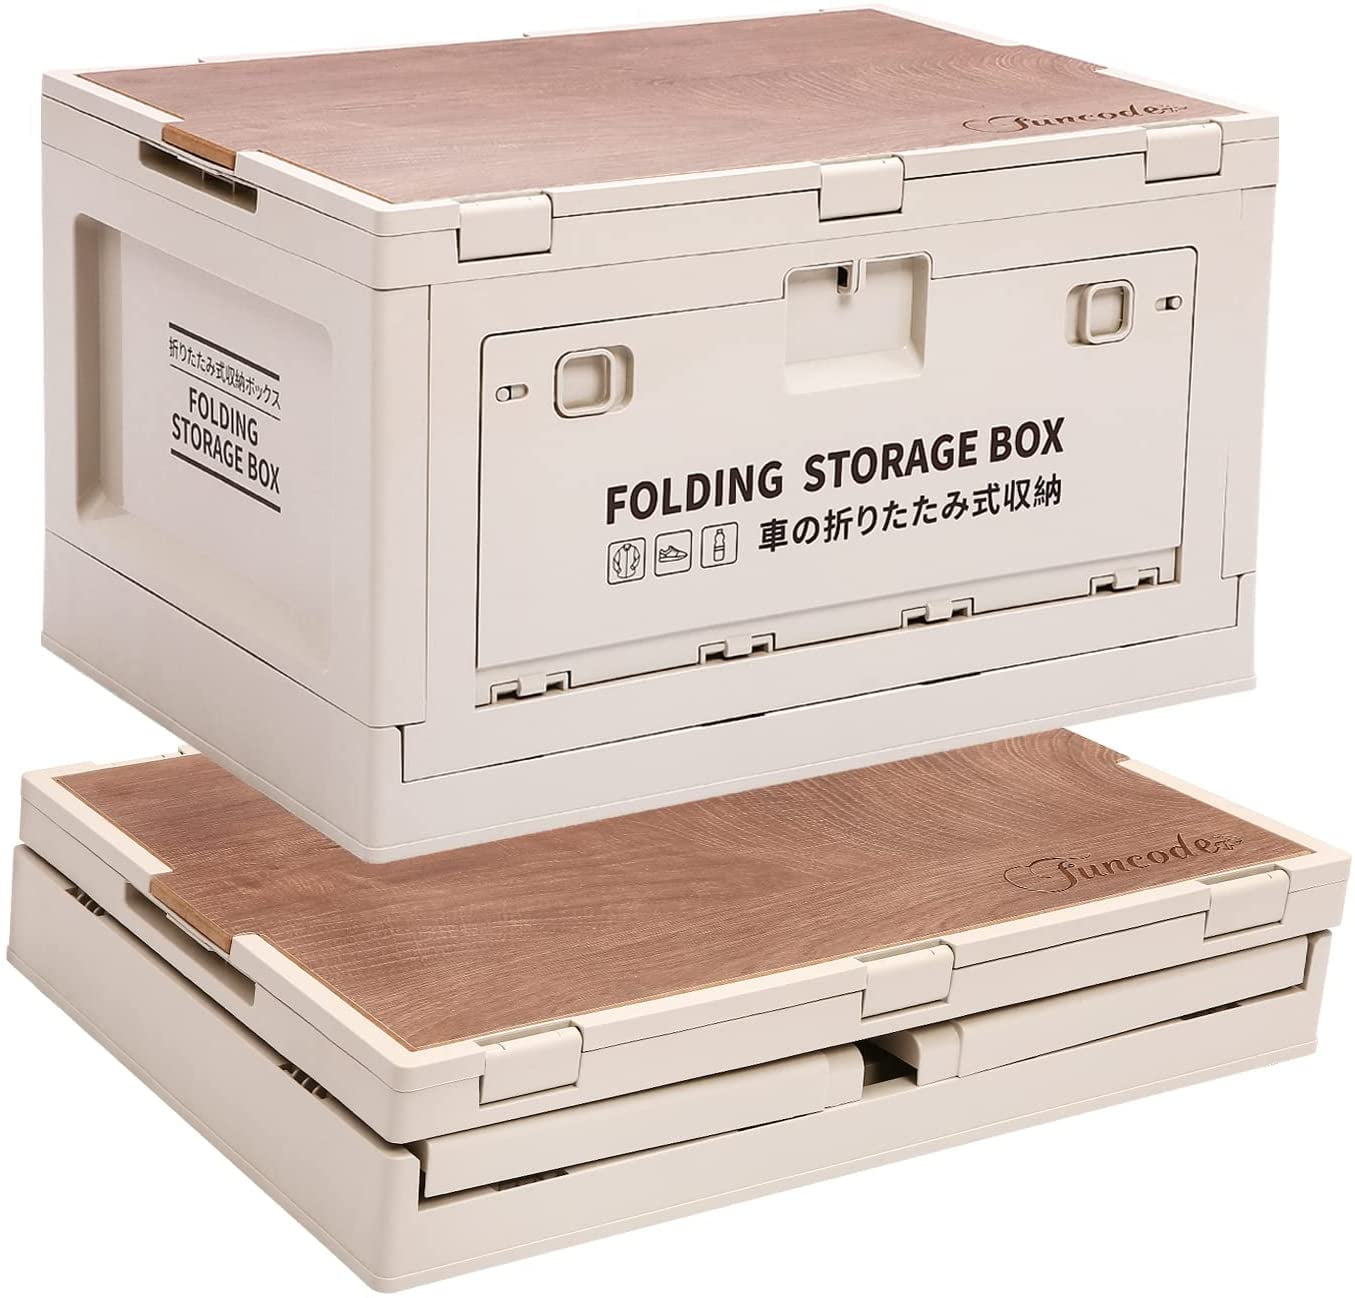 Folding Storage Box With Wooden Cover, Collapsible Storage